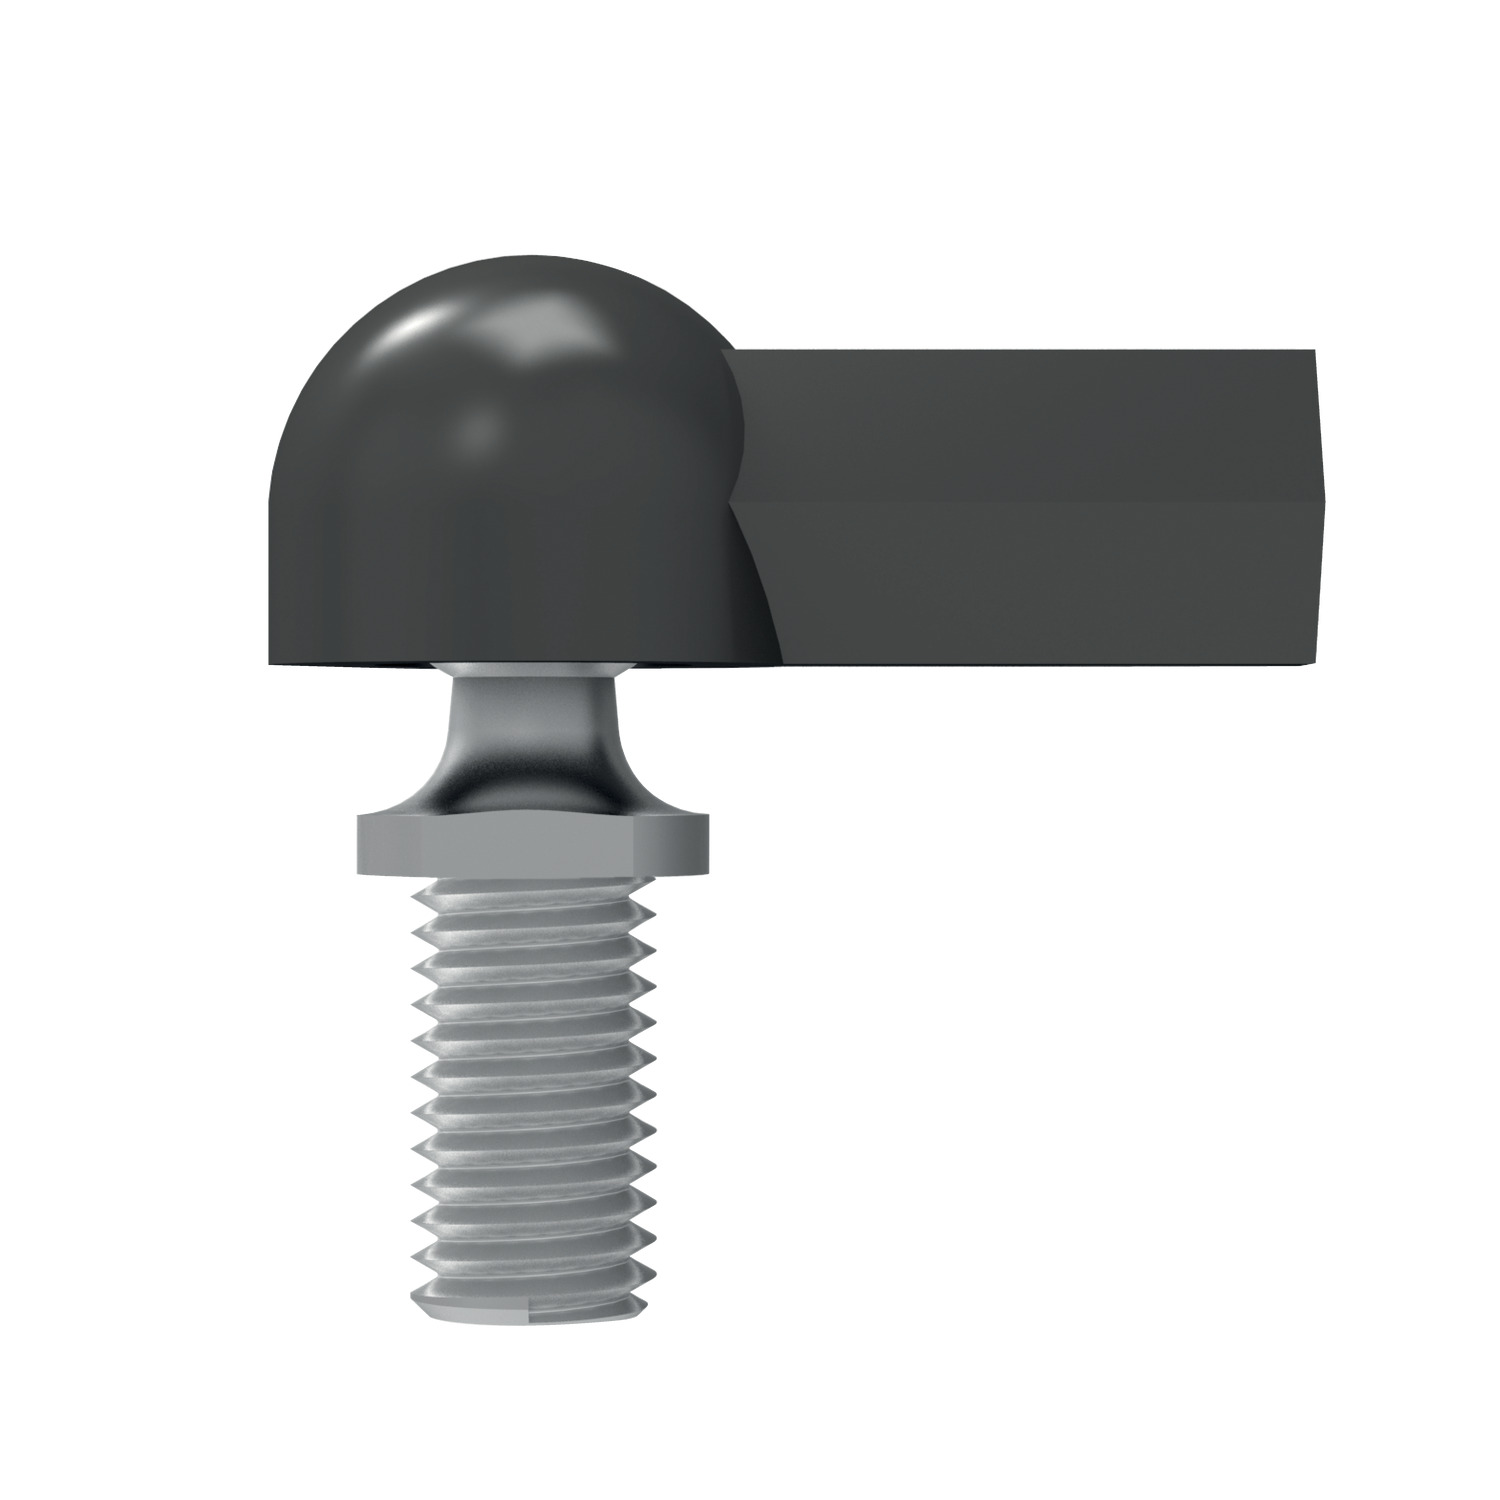 Plastic Ball and Socket Joint Plastic ball and socket joints available with either a plastic or metal ball stud.